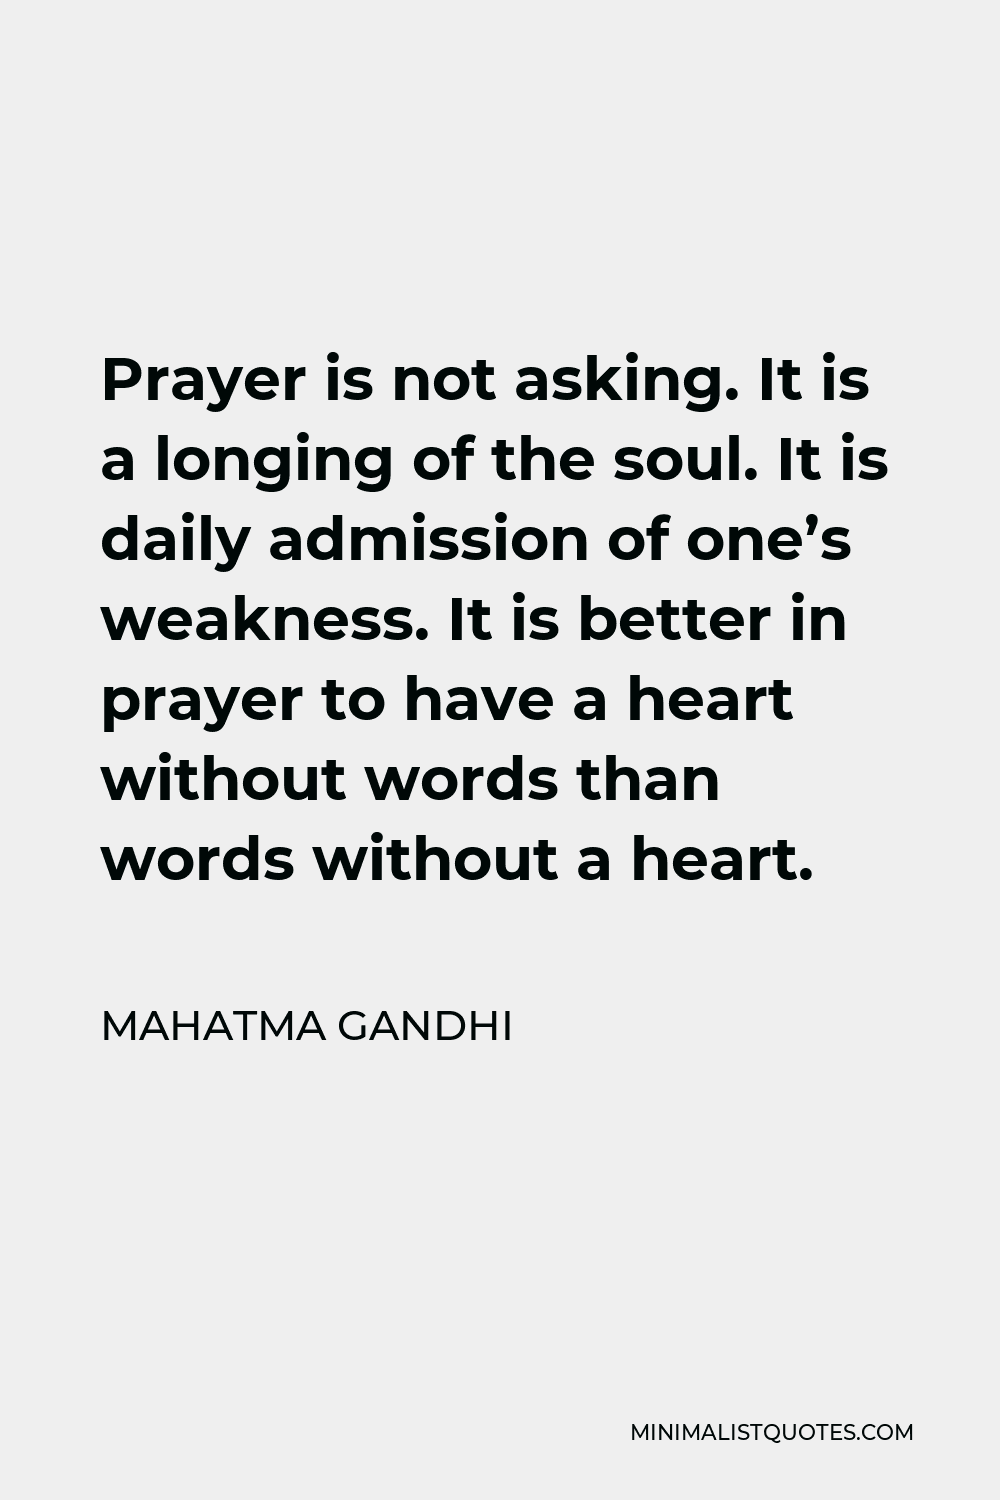 Mahatma Gandhi Quote - Prayer is not asking. It is a longing of the soul. It is daily admission of one’s weakness. It is better in prayer to have a heart without words than words without a heart.